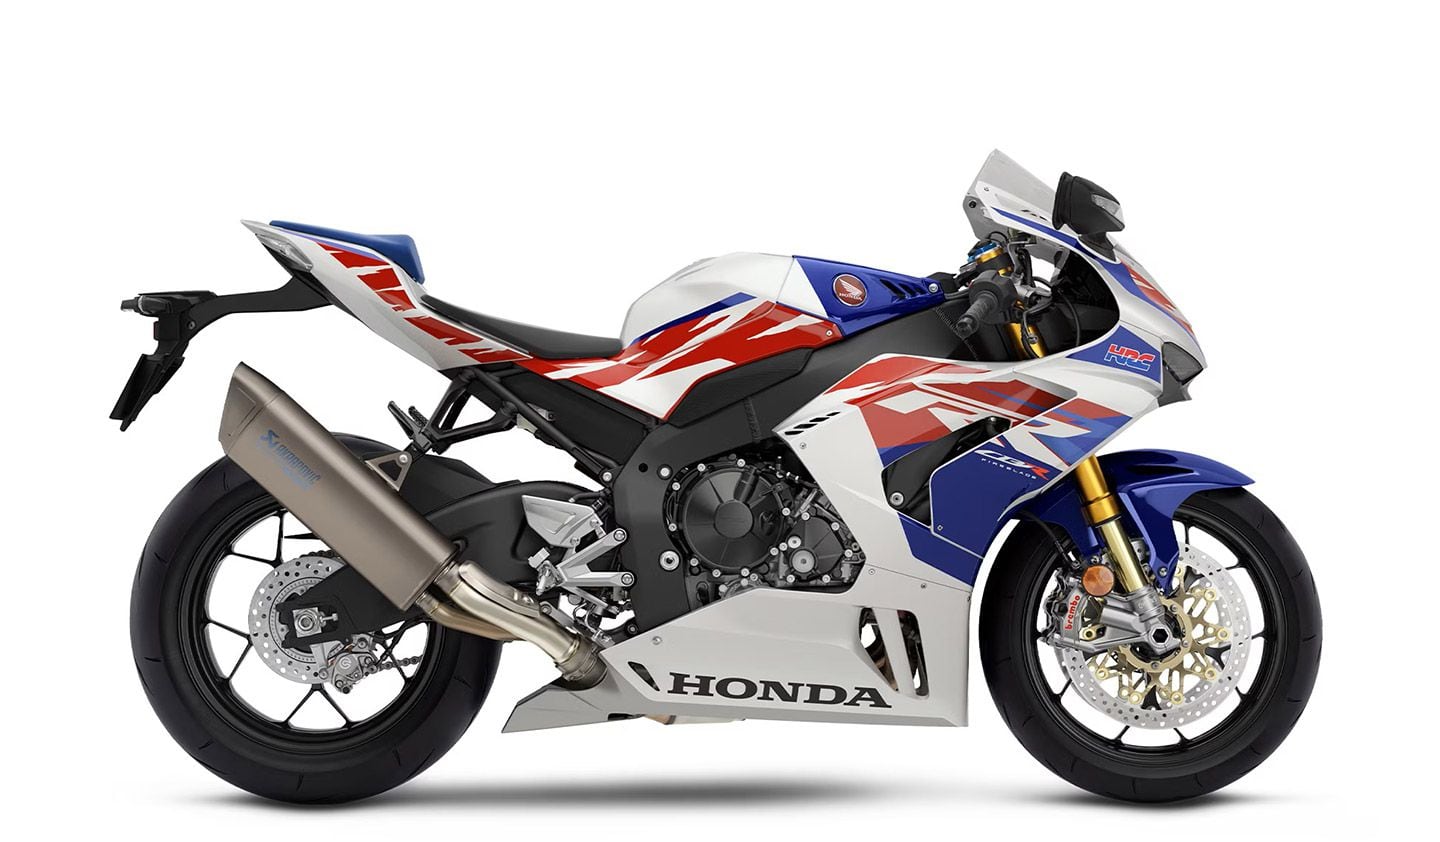 MotoGP performance with classic Honda lines, the CBR1000RR-R brings plenty of quickness to the table.